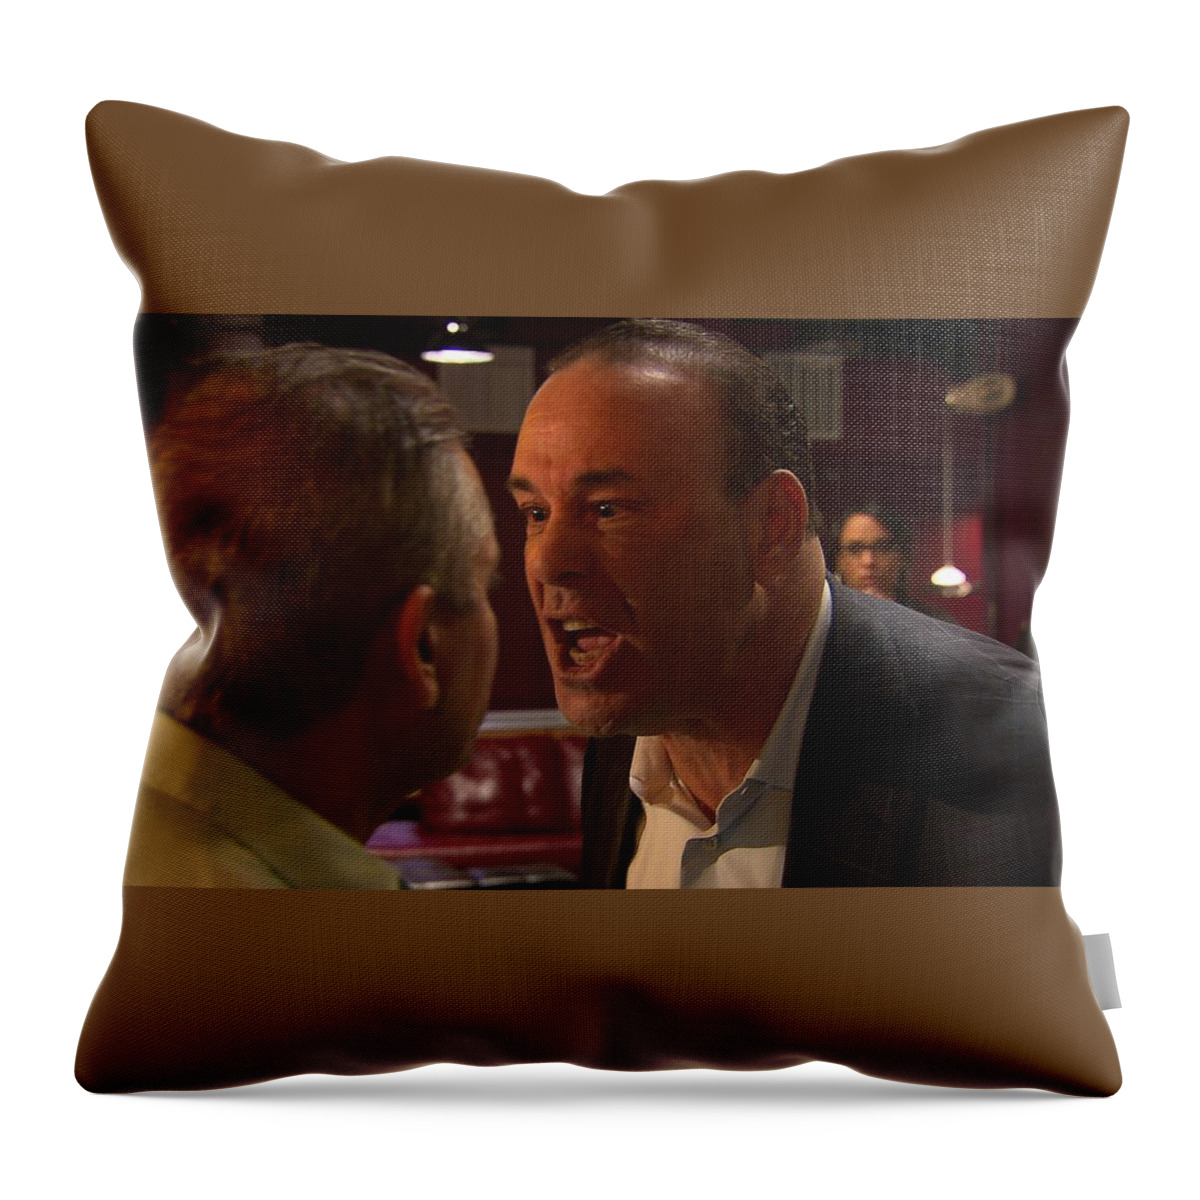 Bar Rescue Throw Pillow featuring the digital art Bar Rescue by Maye Loeser